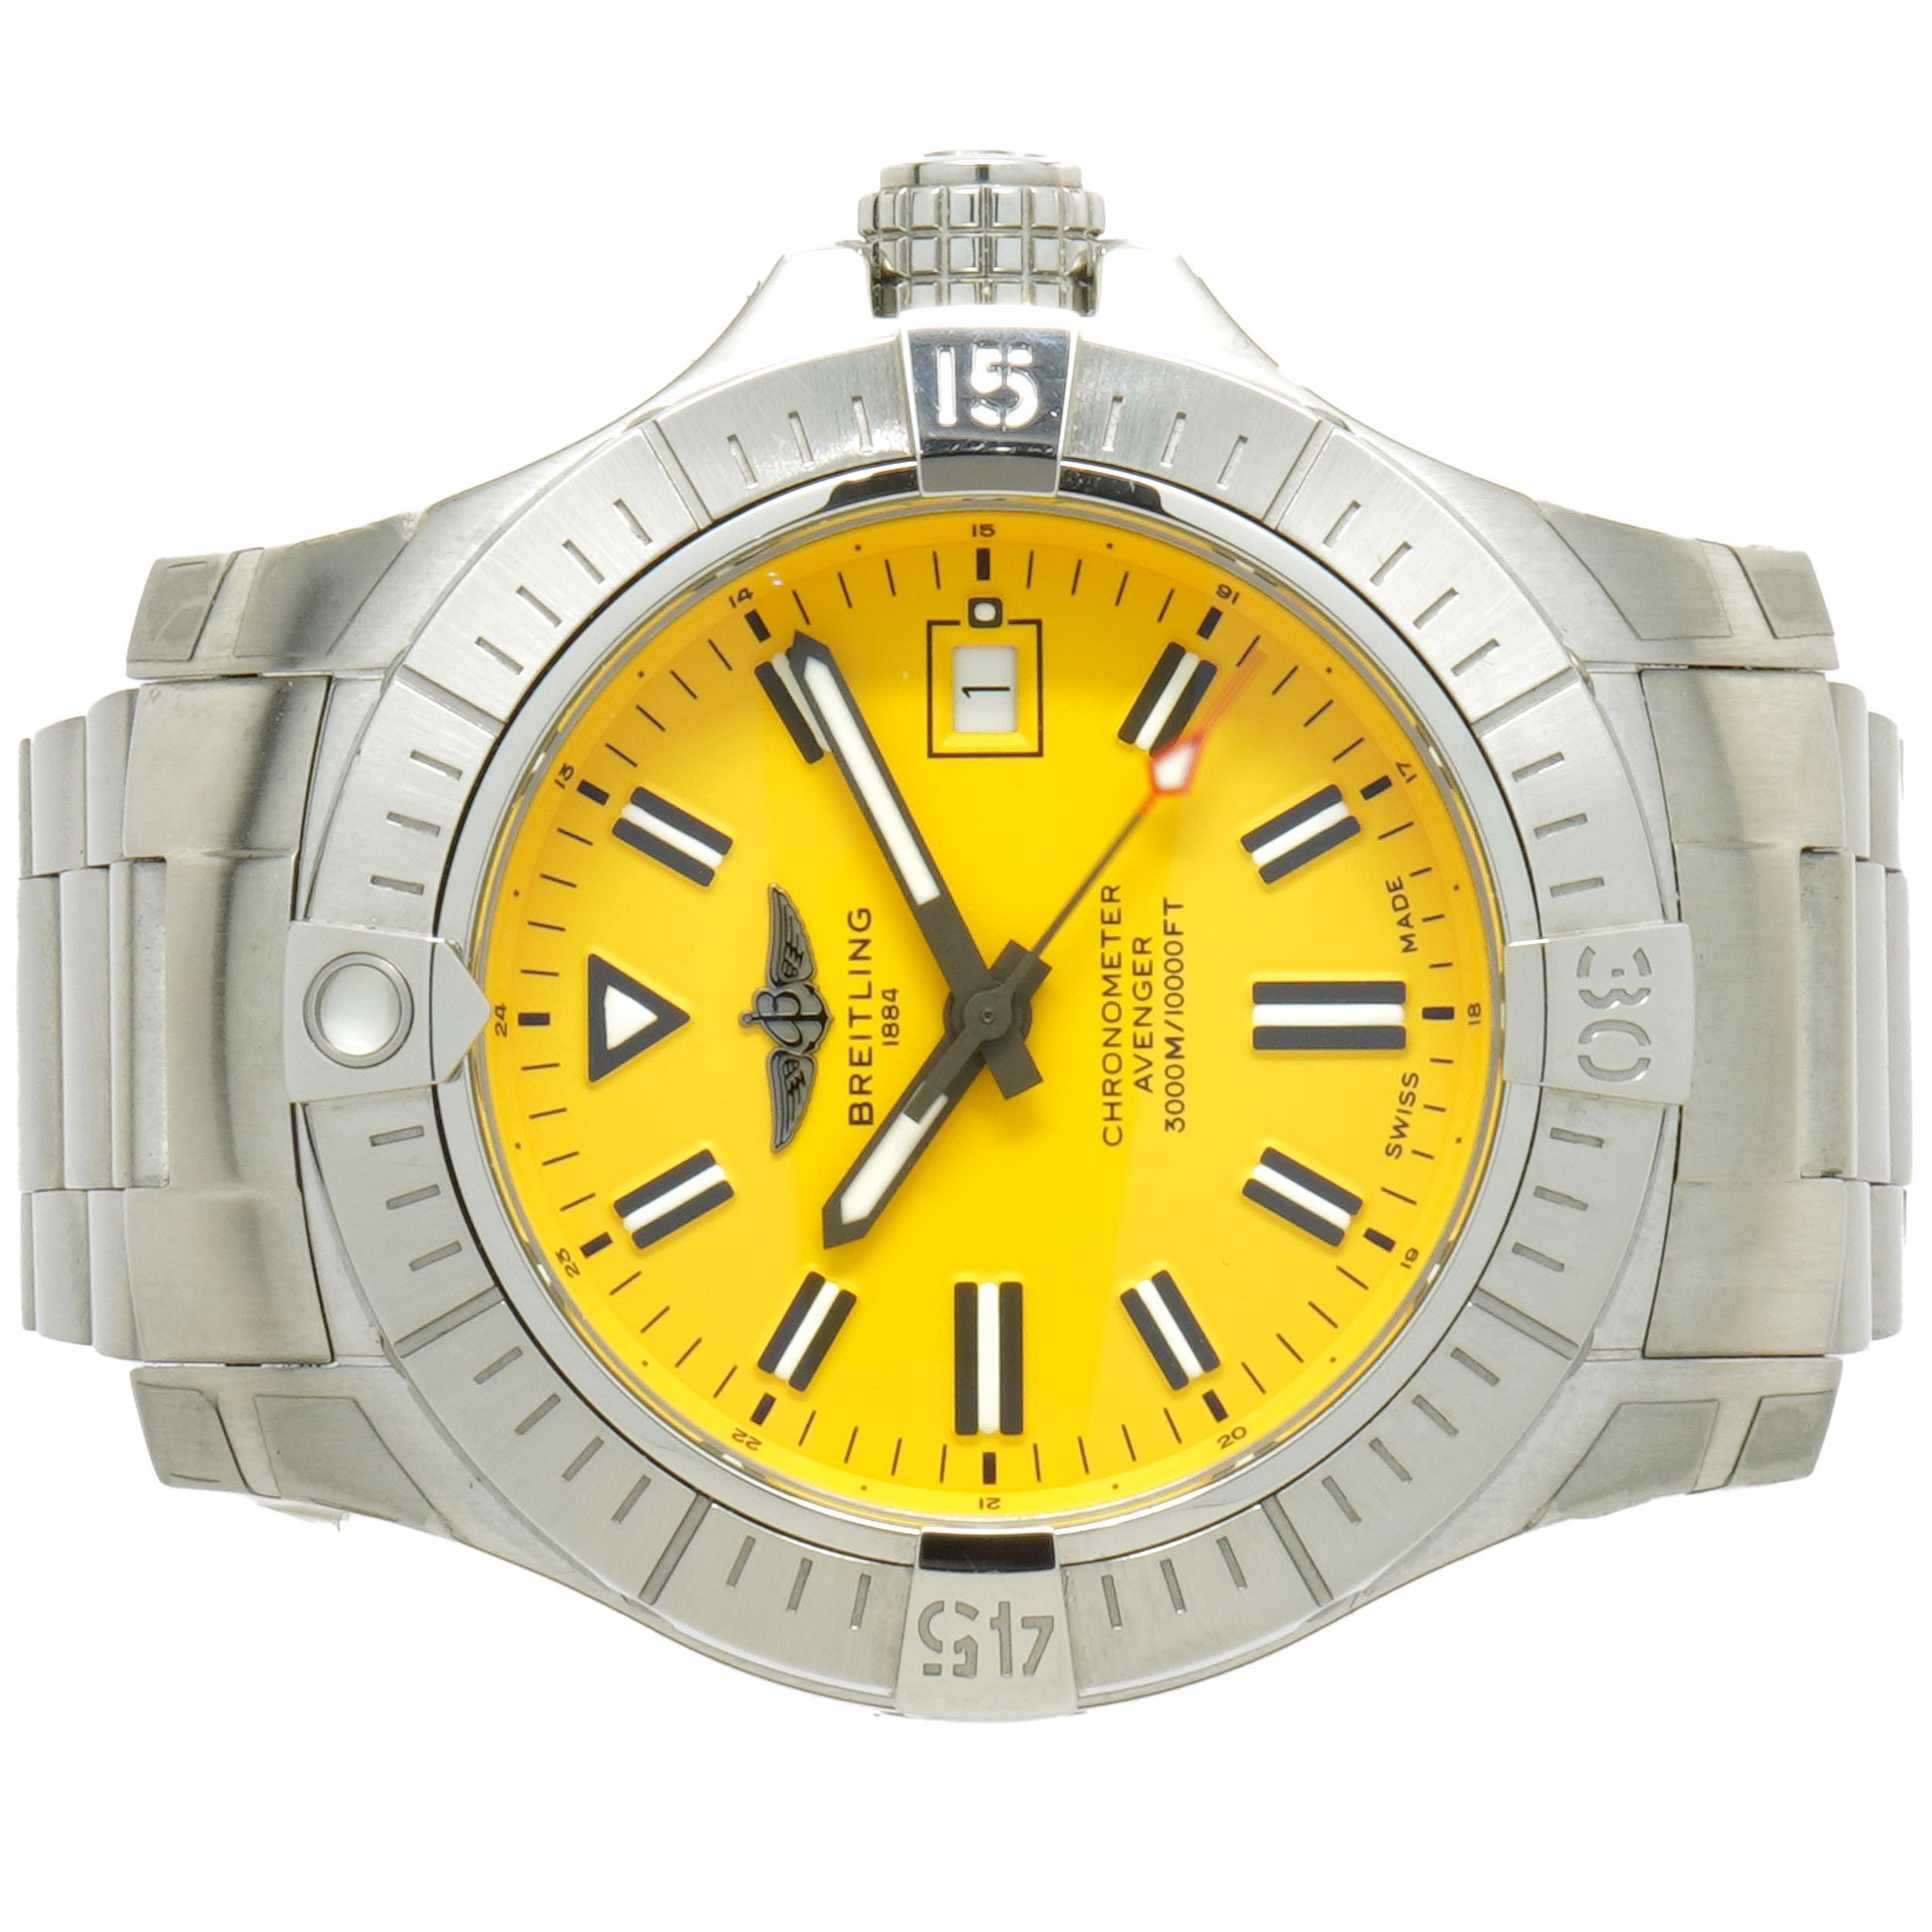 Movement: automatic
Function: hours, minutes, seconds, date
Case: round 45mm case, stainless steel timing bezel, sapphire crystal, Breitling engraved case-back, screw-down crown
Band: Breitling stainless steel bracelet, integrated clasp
Dial: yellow